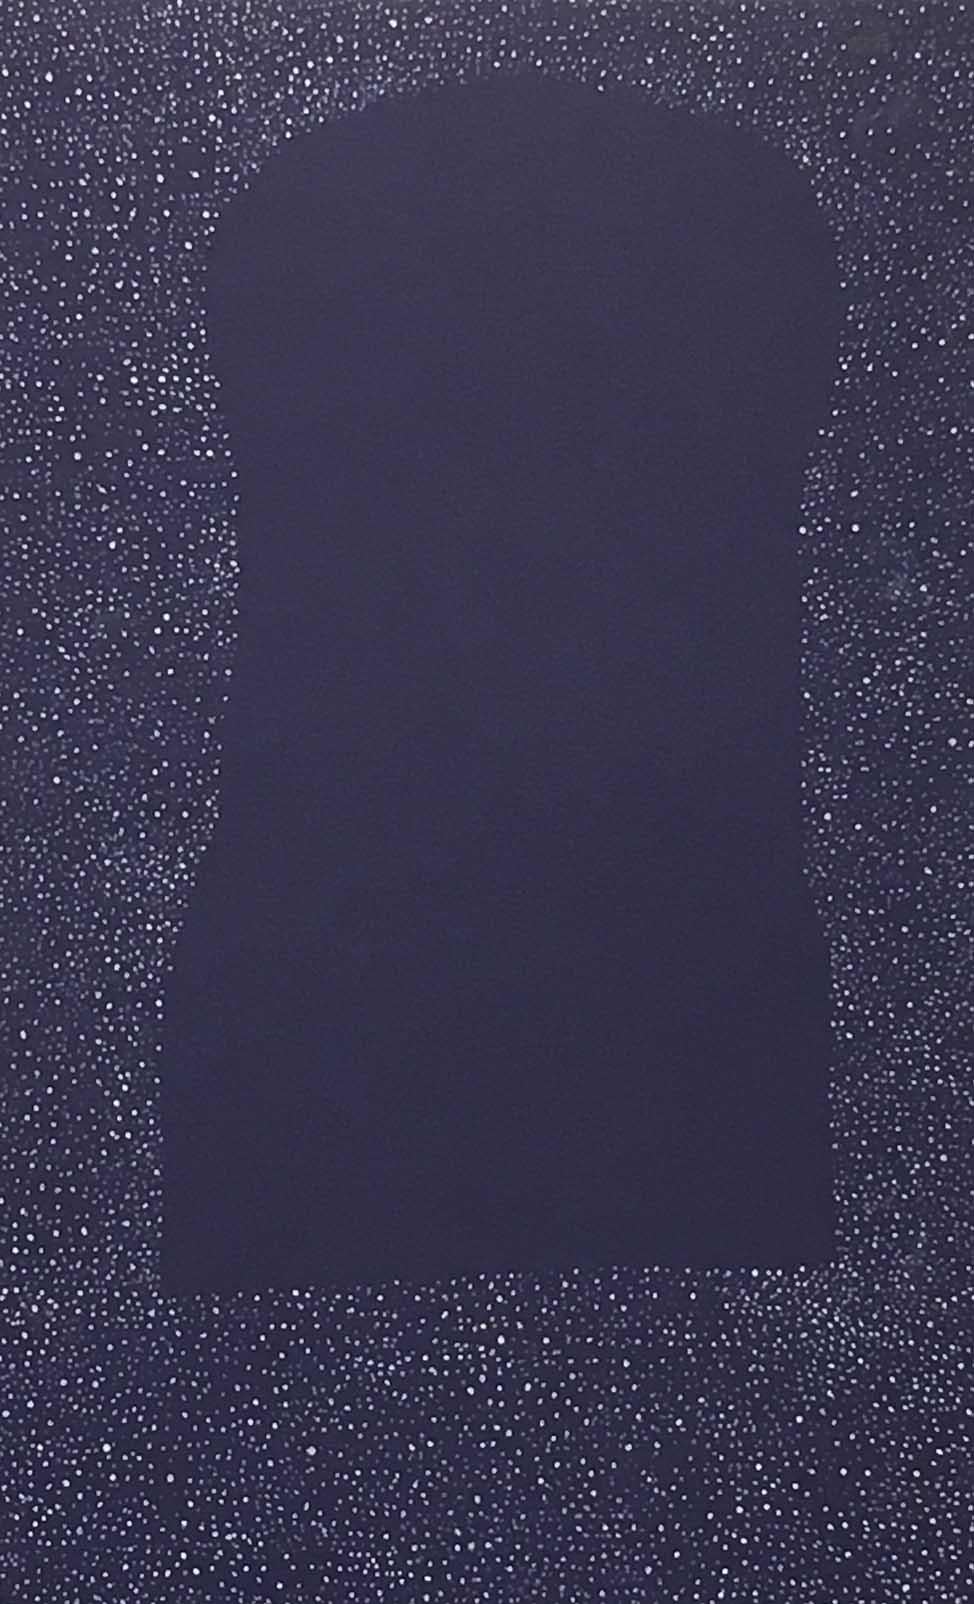 Andra Samelson, Next to Nothing 15, 2001, ink on mat board, 32x 20 inches